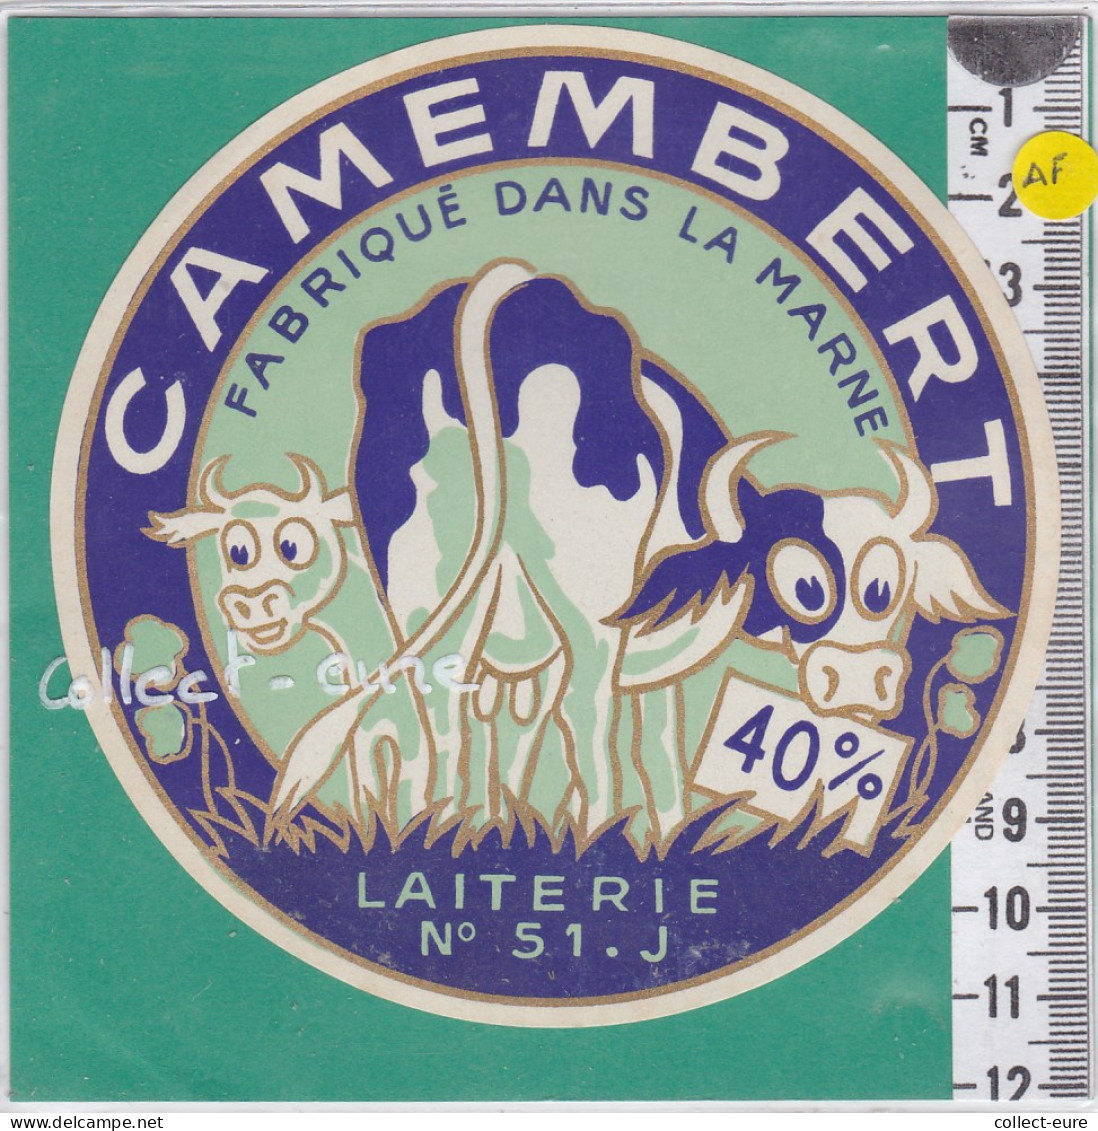 C1187 FROMAGE  CAMEMBERT  SAINT JEAN SUR MOIVRE MARNE 40 %  - Fromage